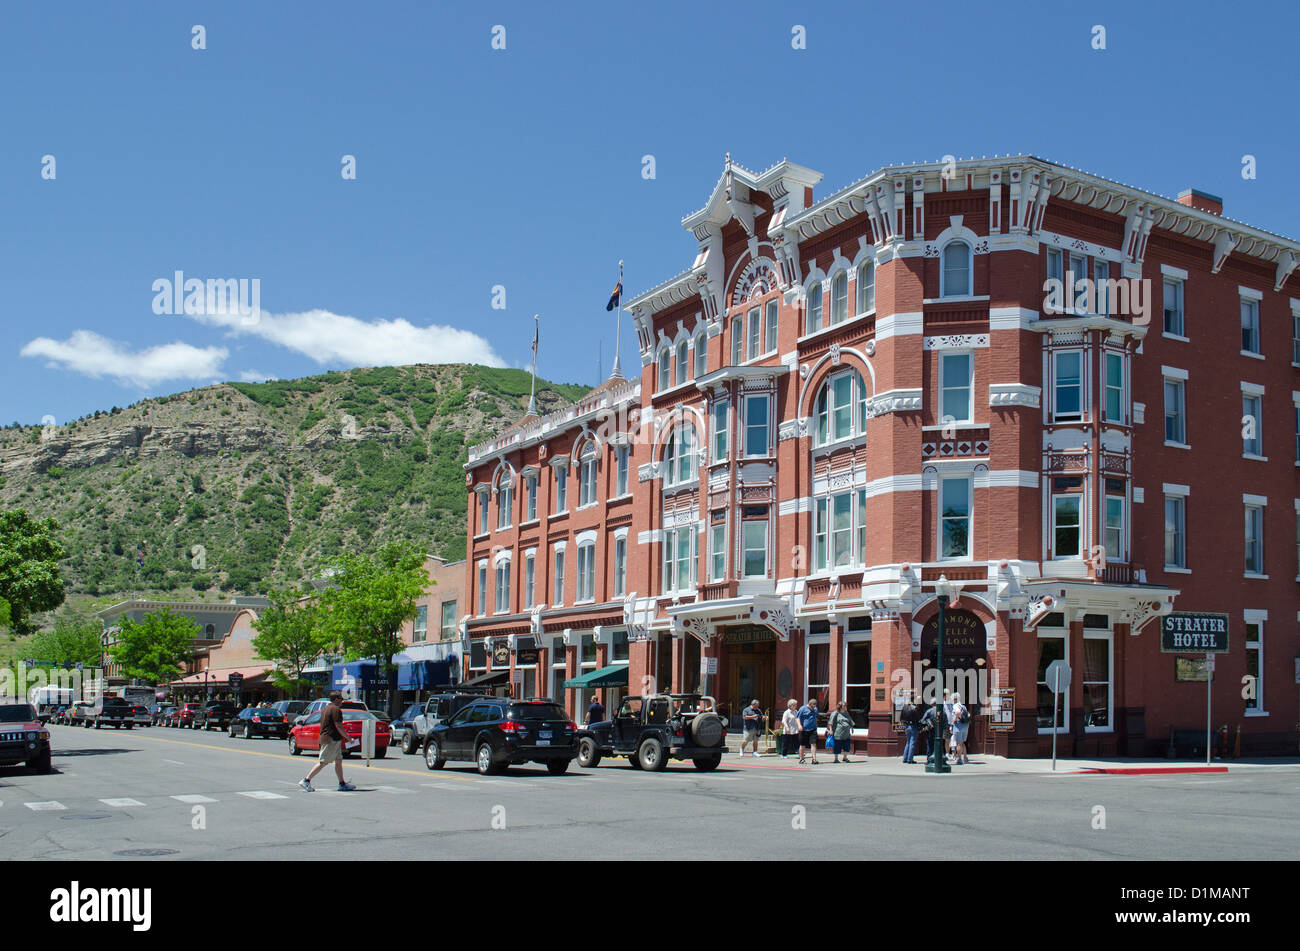 Historic Durango Colorado with its famous railroad museum and trains Stock Photo